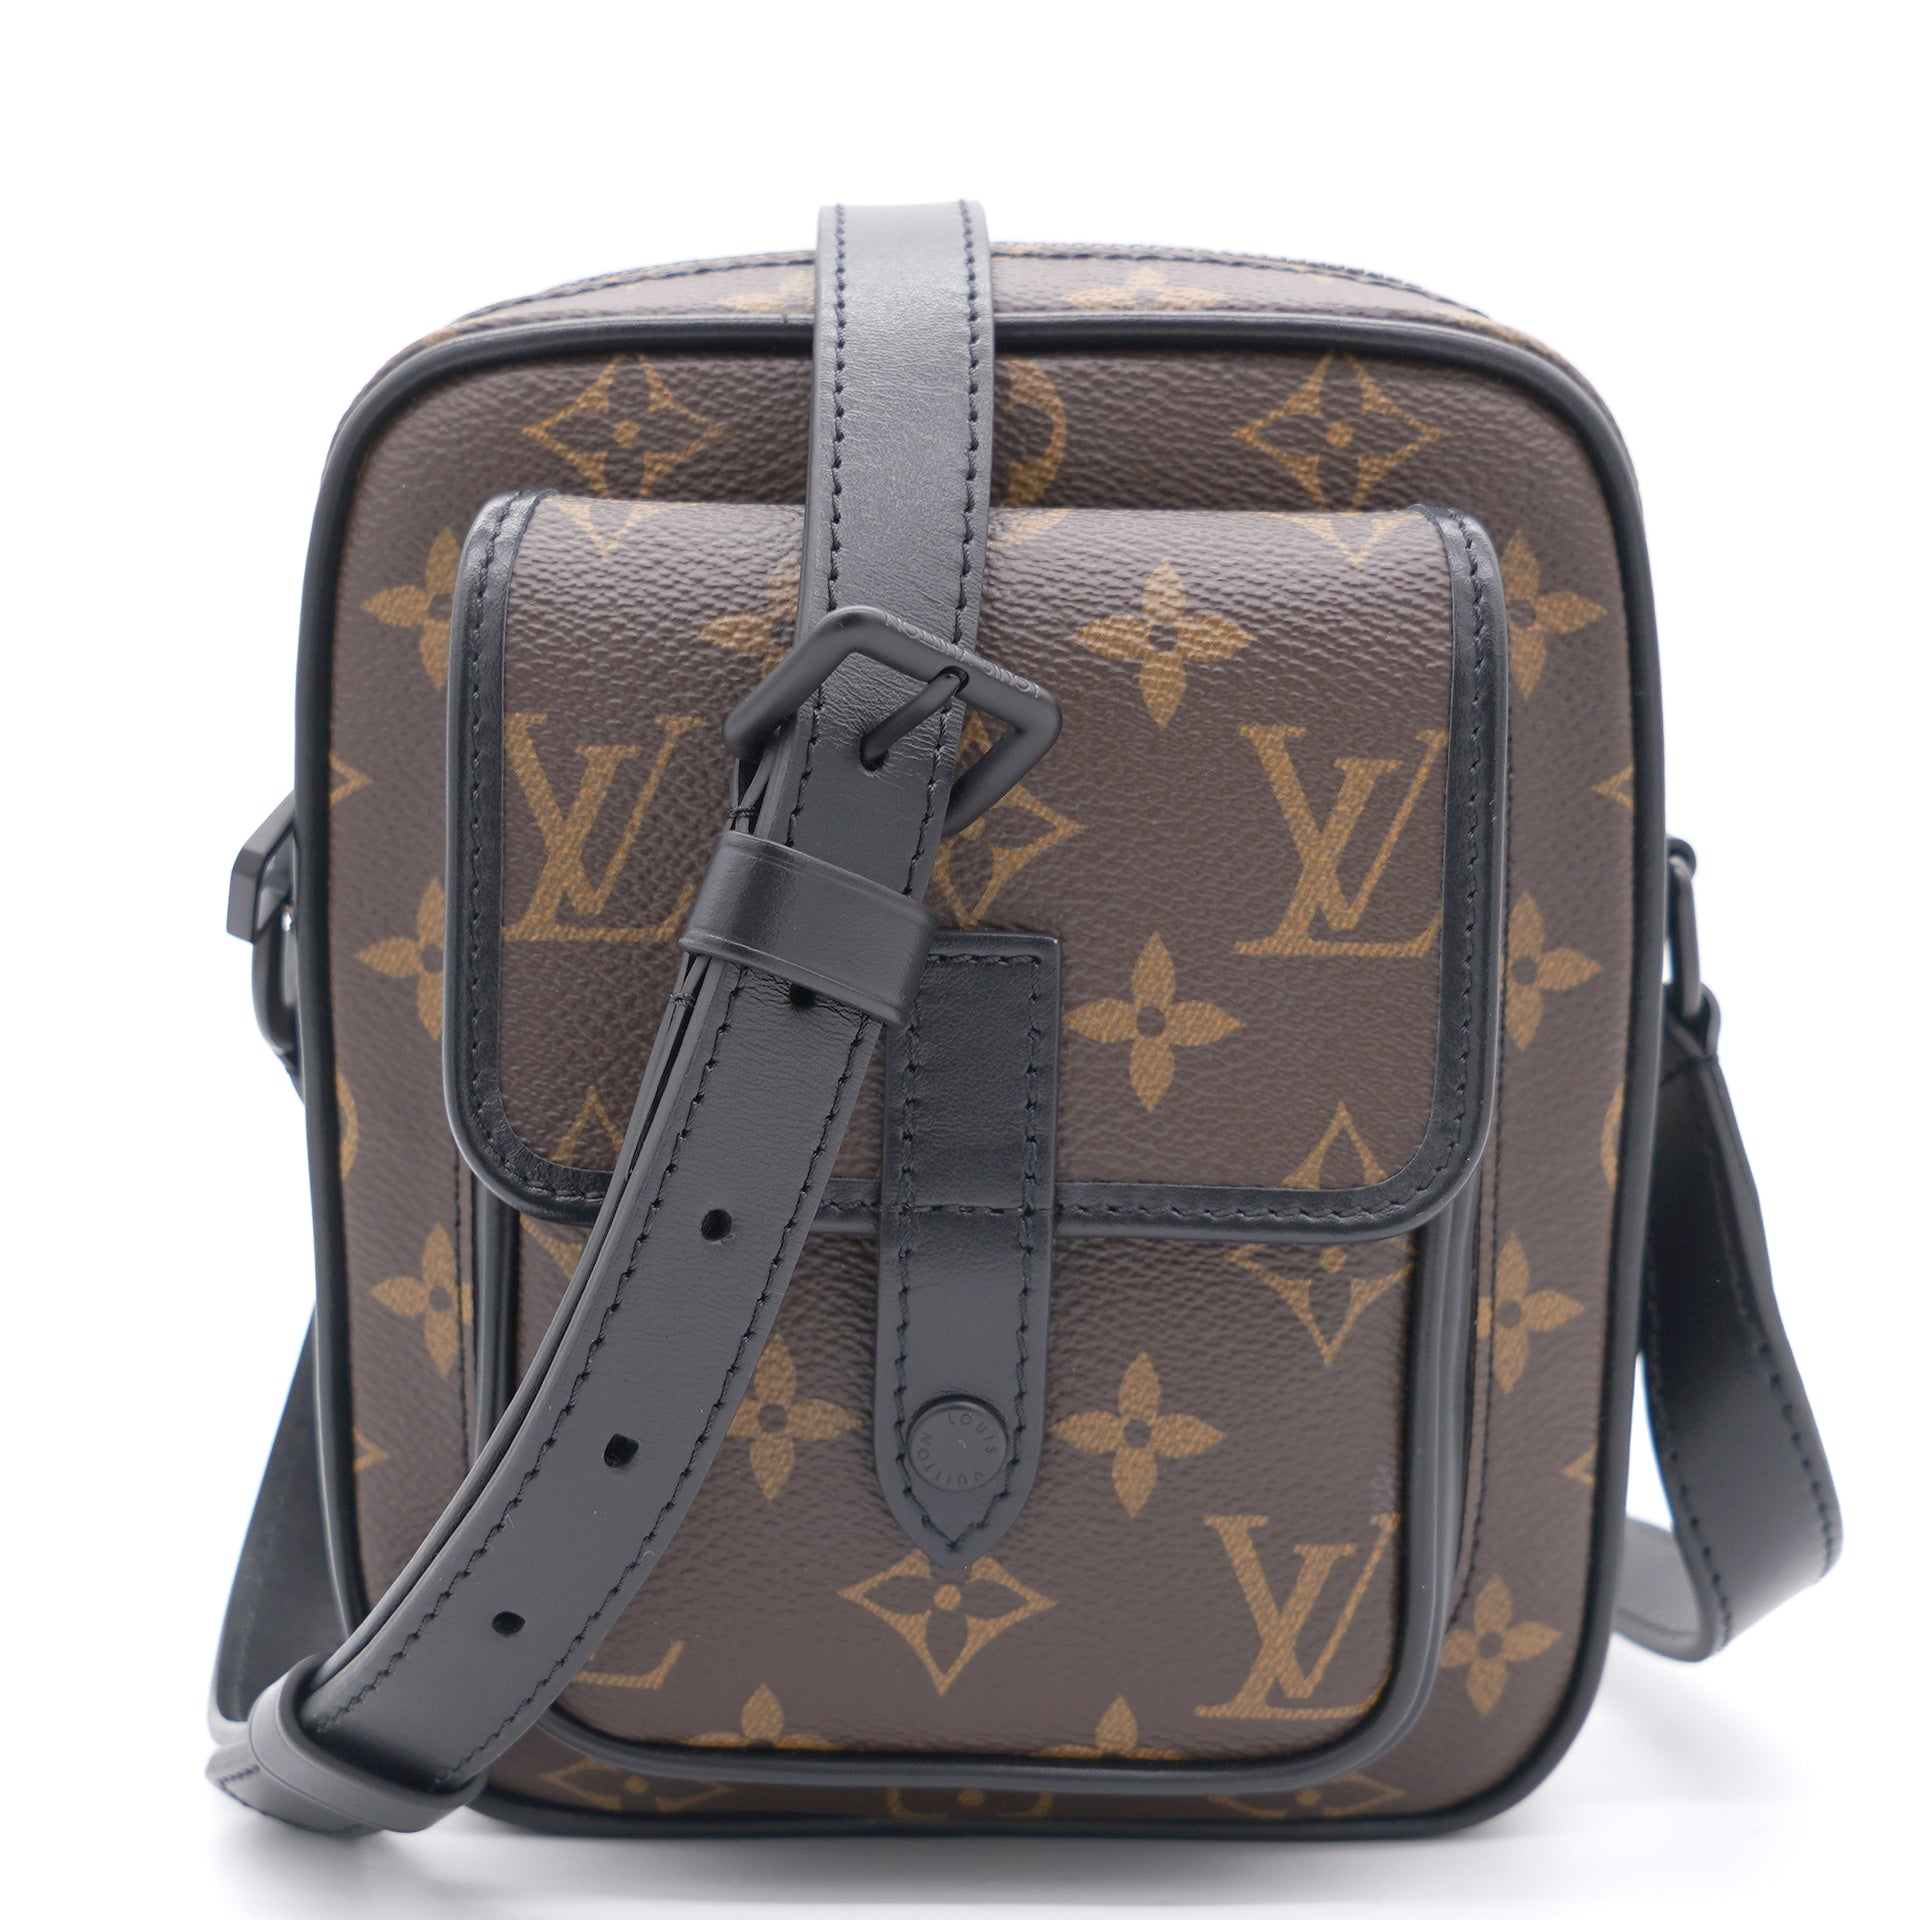 Lv Christopher Wearable Wallet